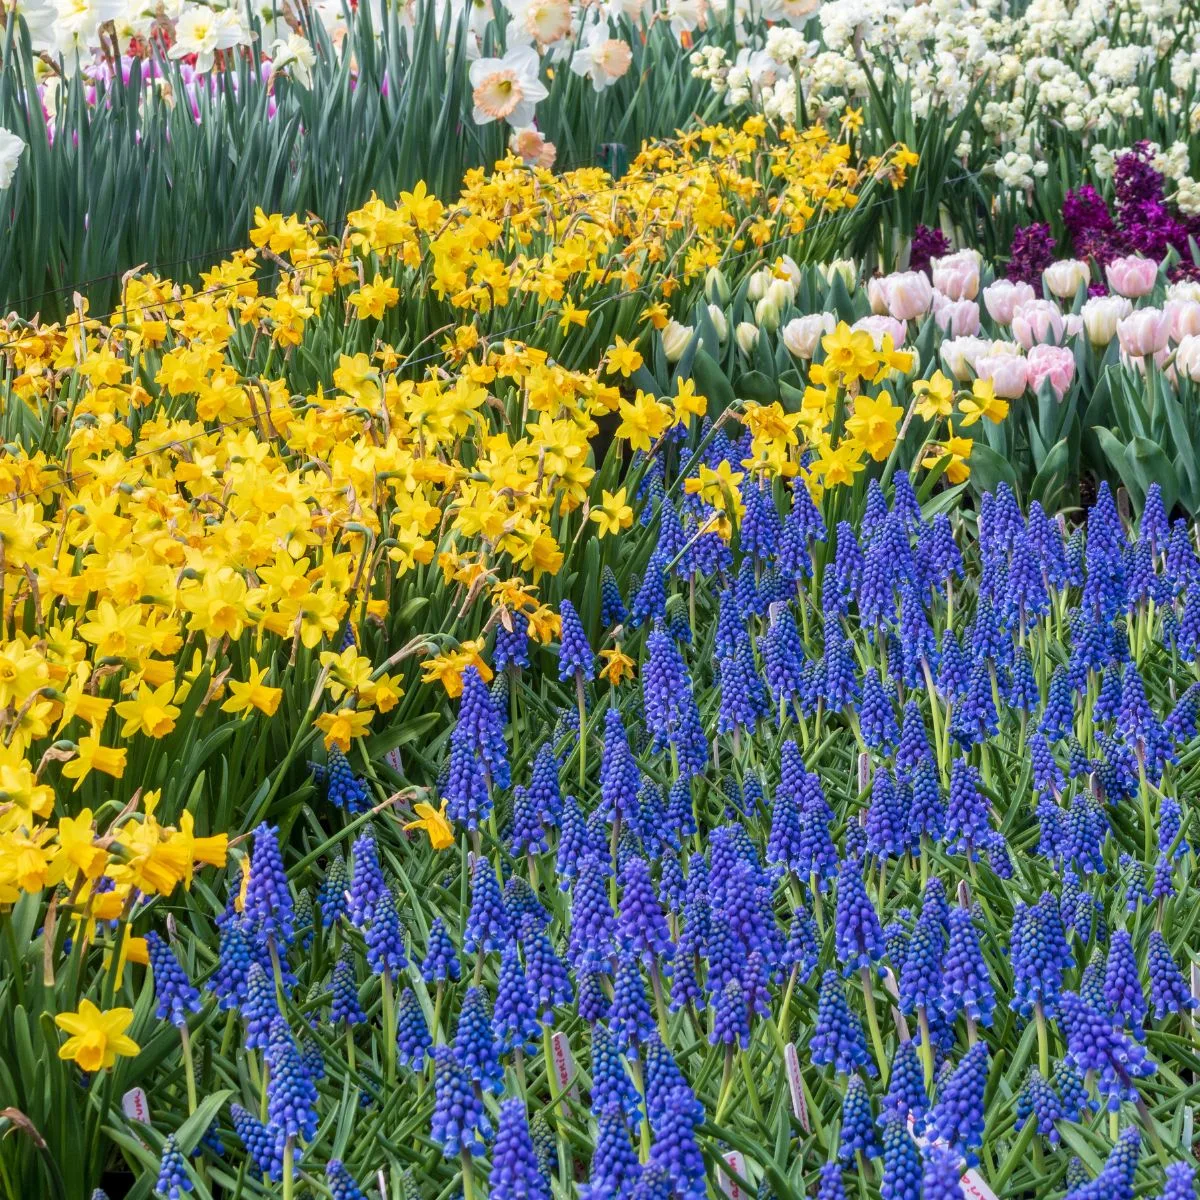 spring flowers: muscari, daffodils, and tulips